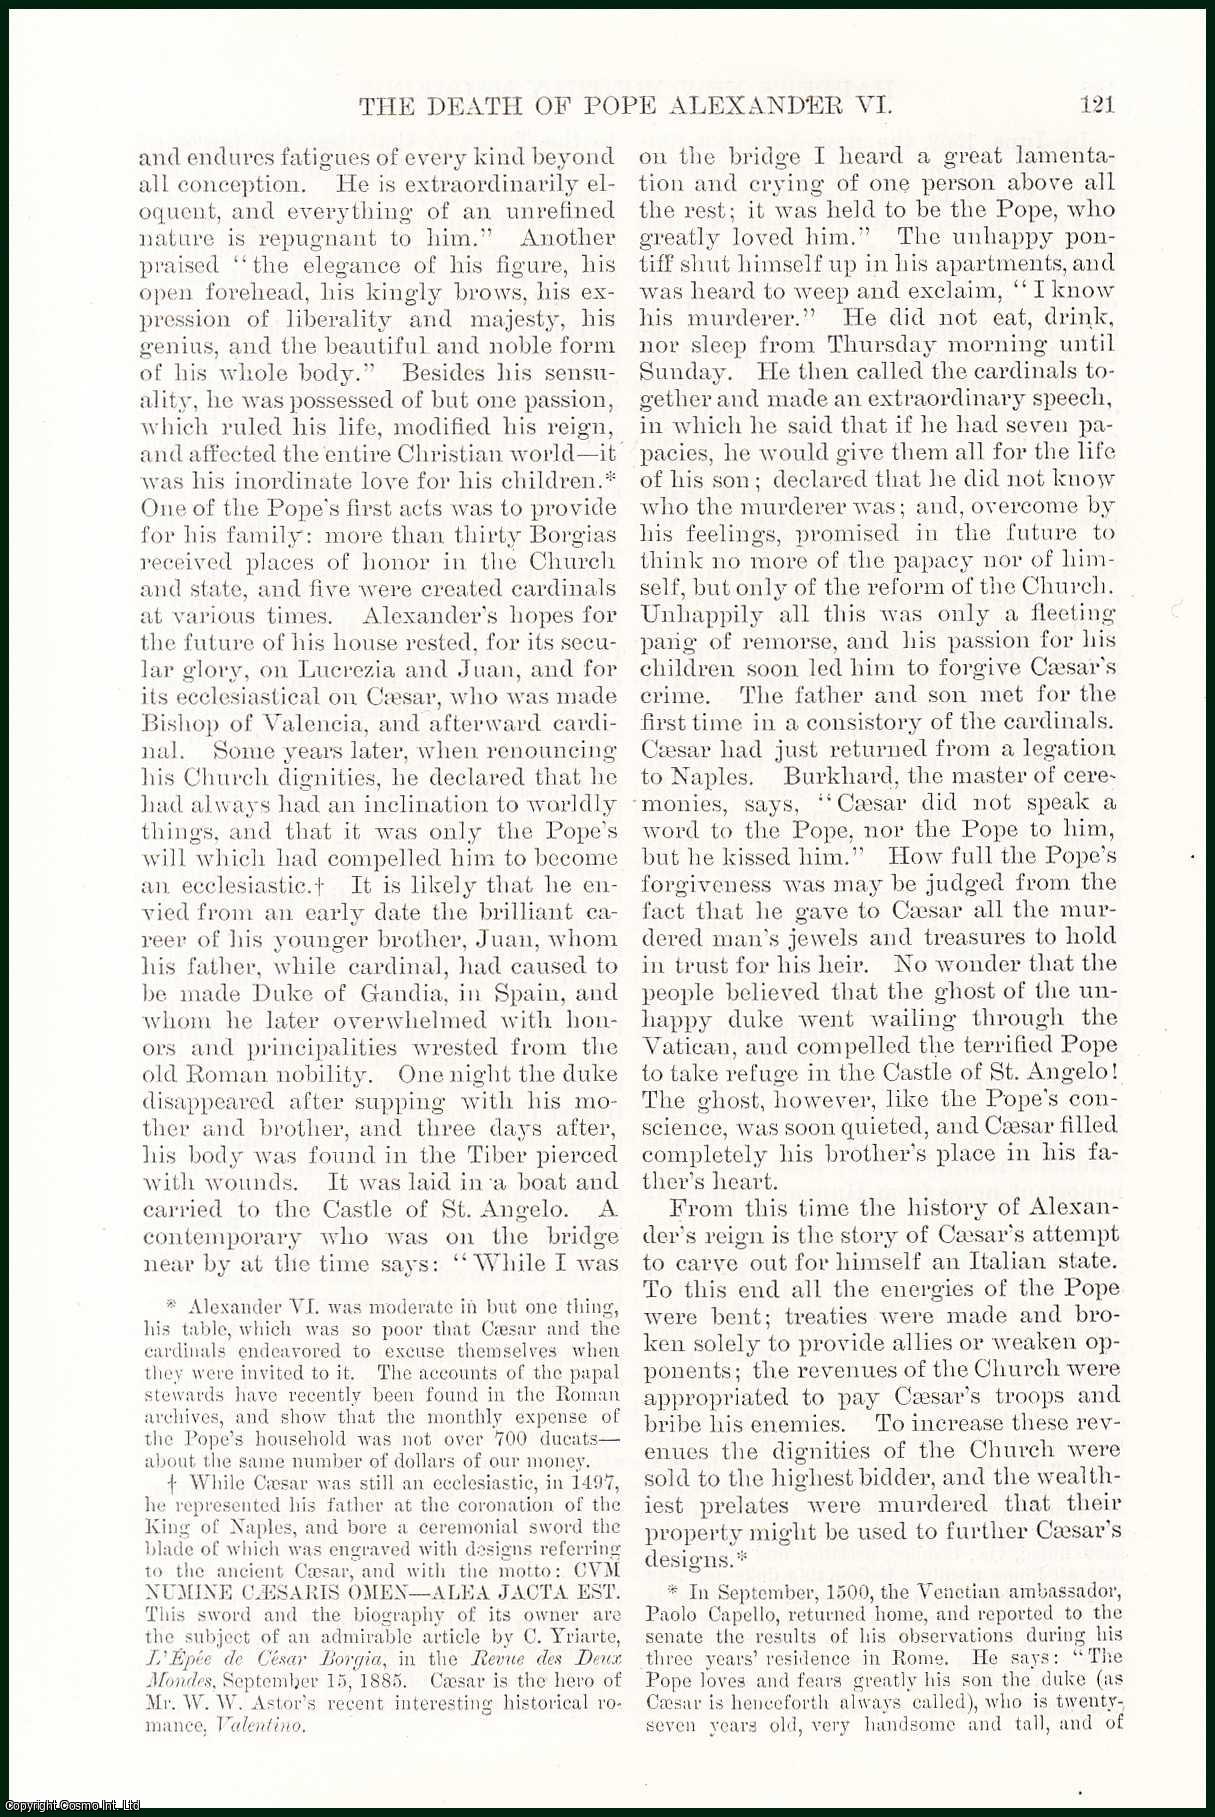 Professor T.F. Crane - The Death of Pope Alexander VI, Former head of the Catholic Church. An uncommon original article from the Harper's Monthly Magazine, 1886.